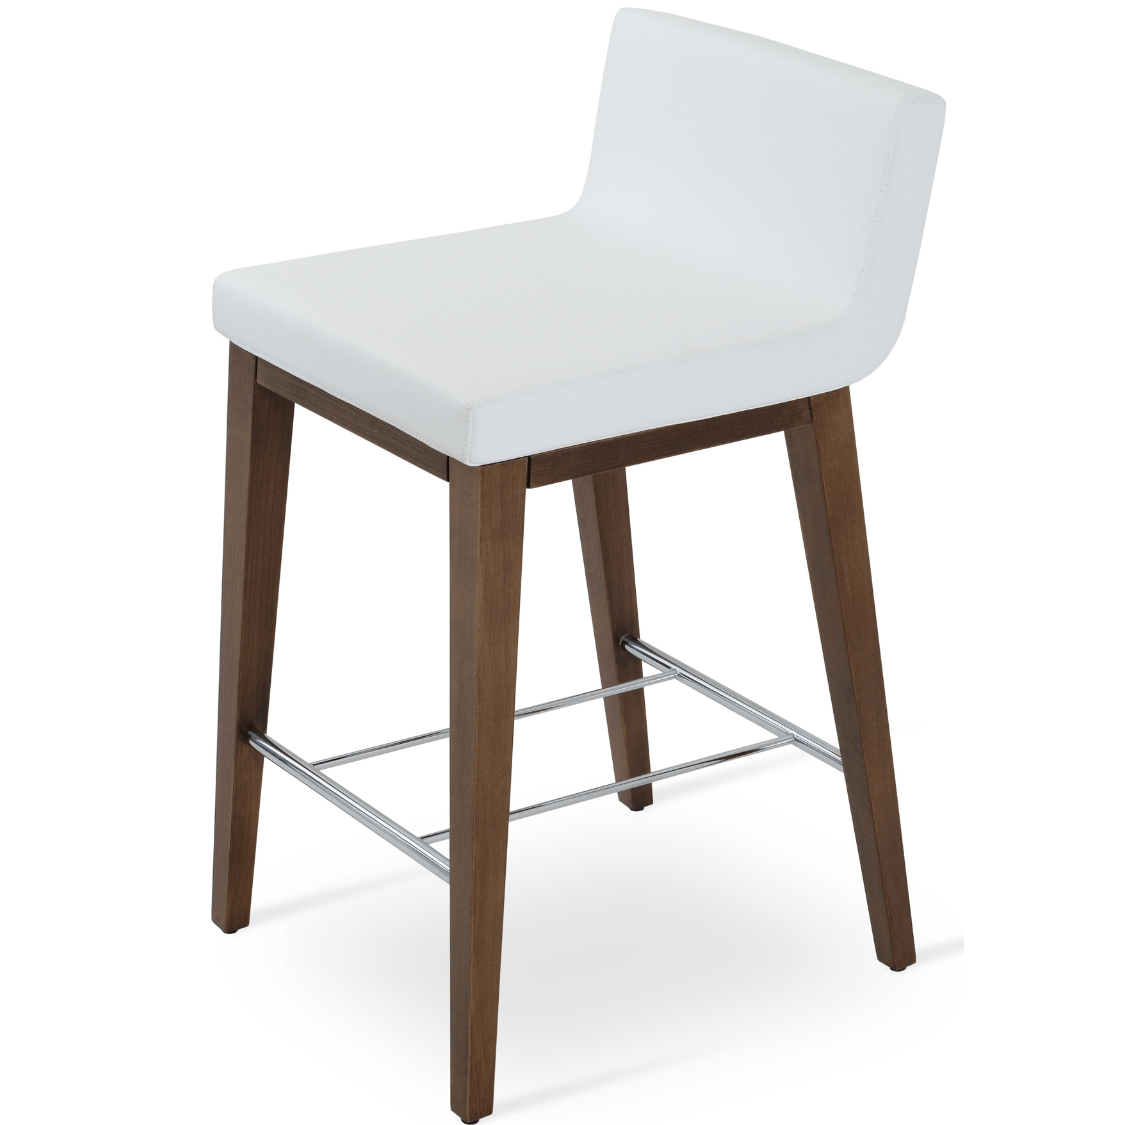 White Leather Bar Stools Dallas Wood - Your Bar Stools Canada